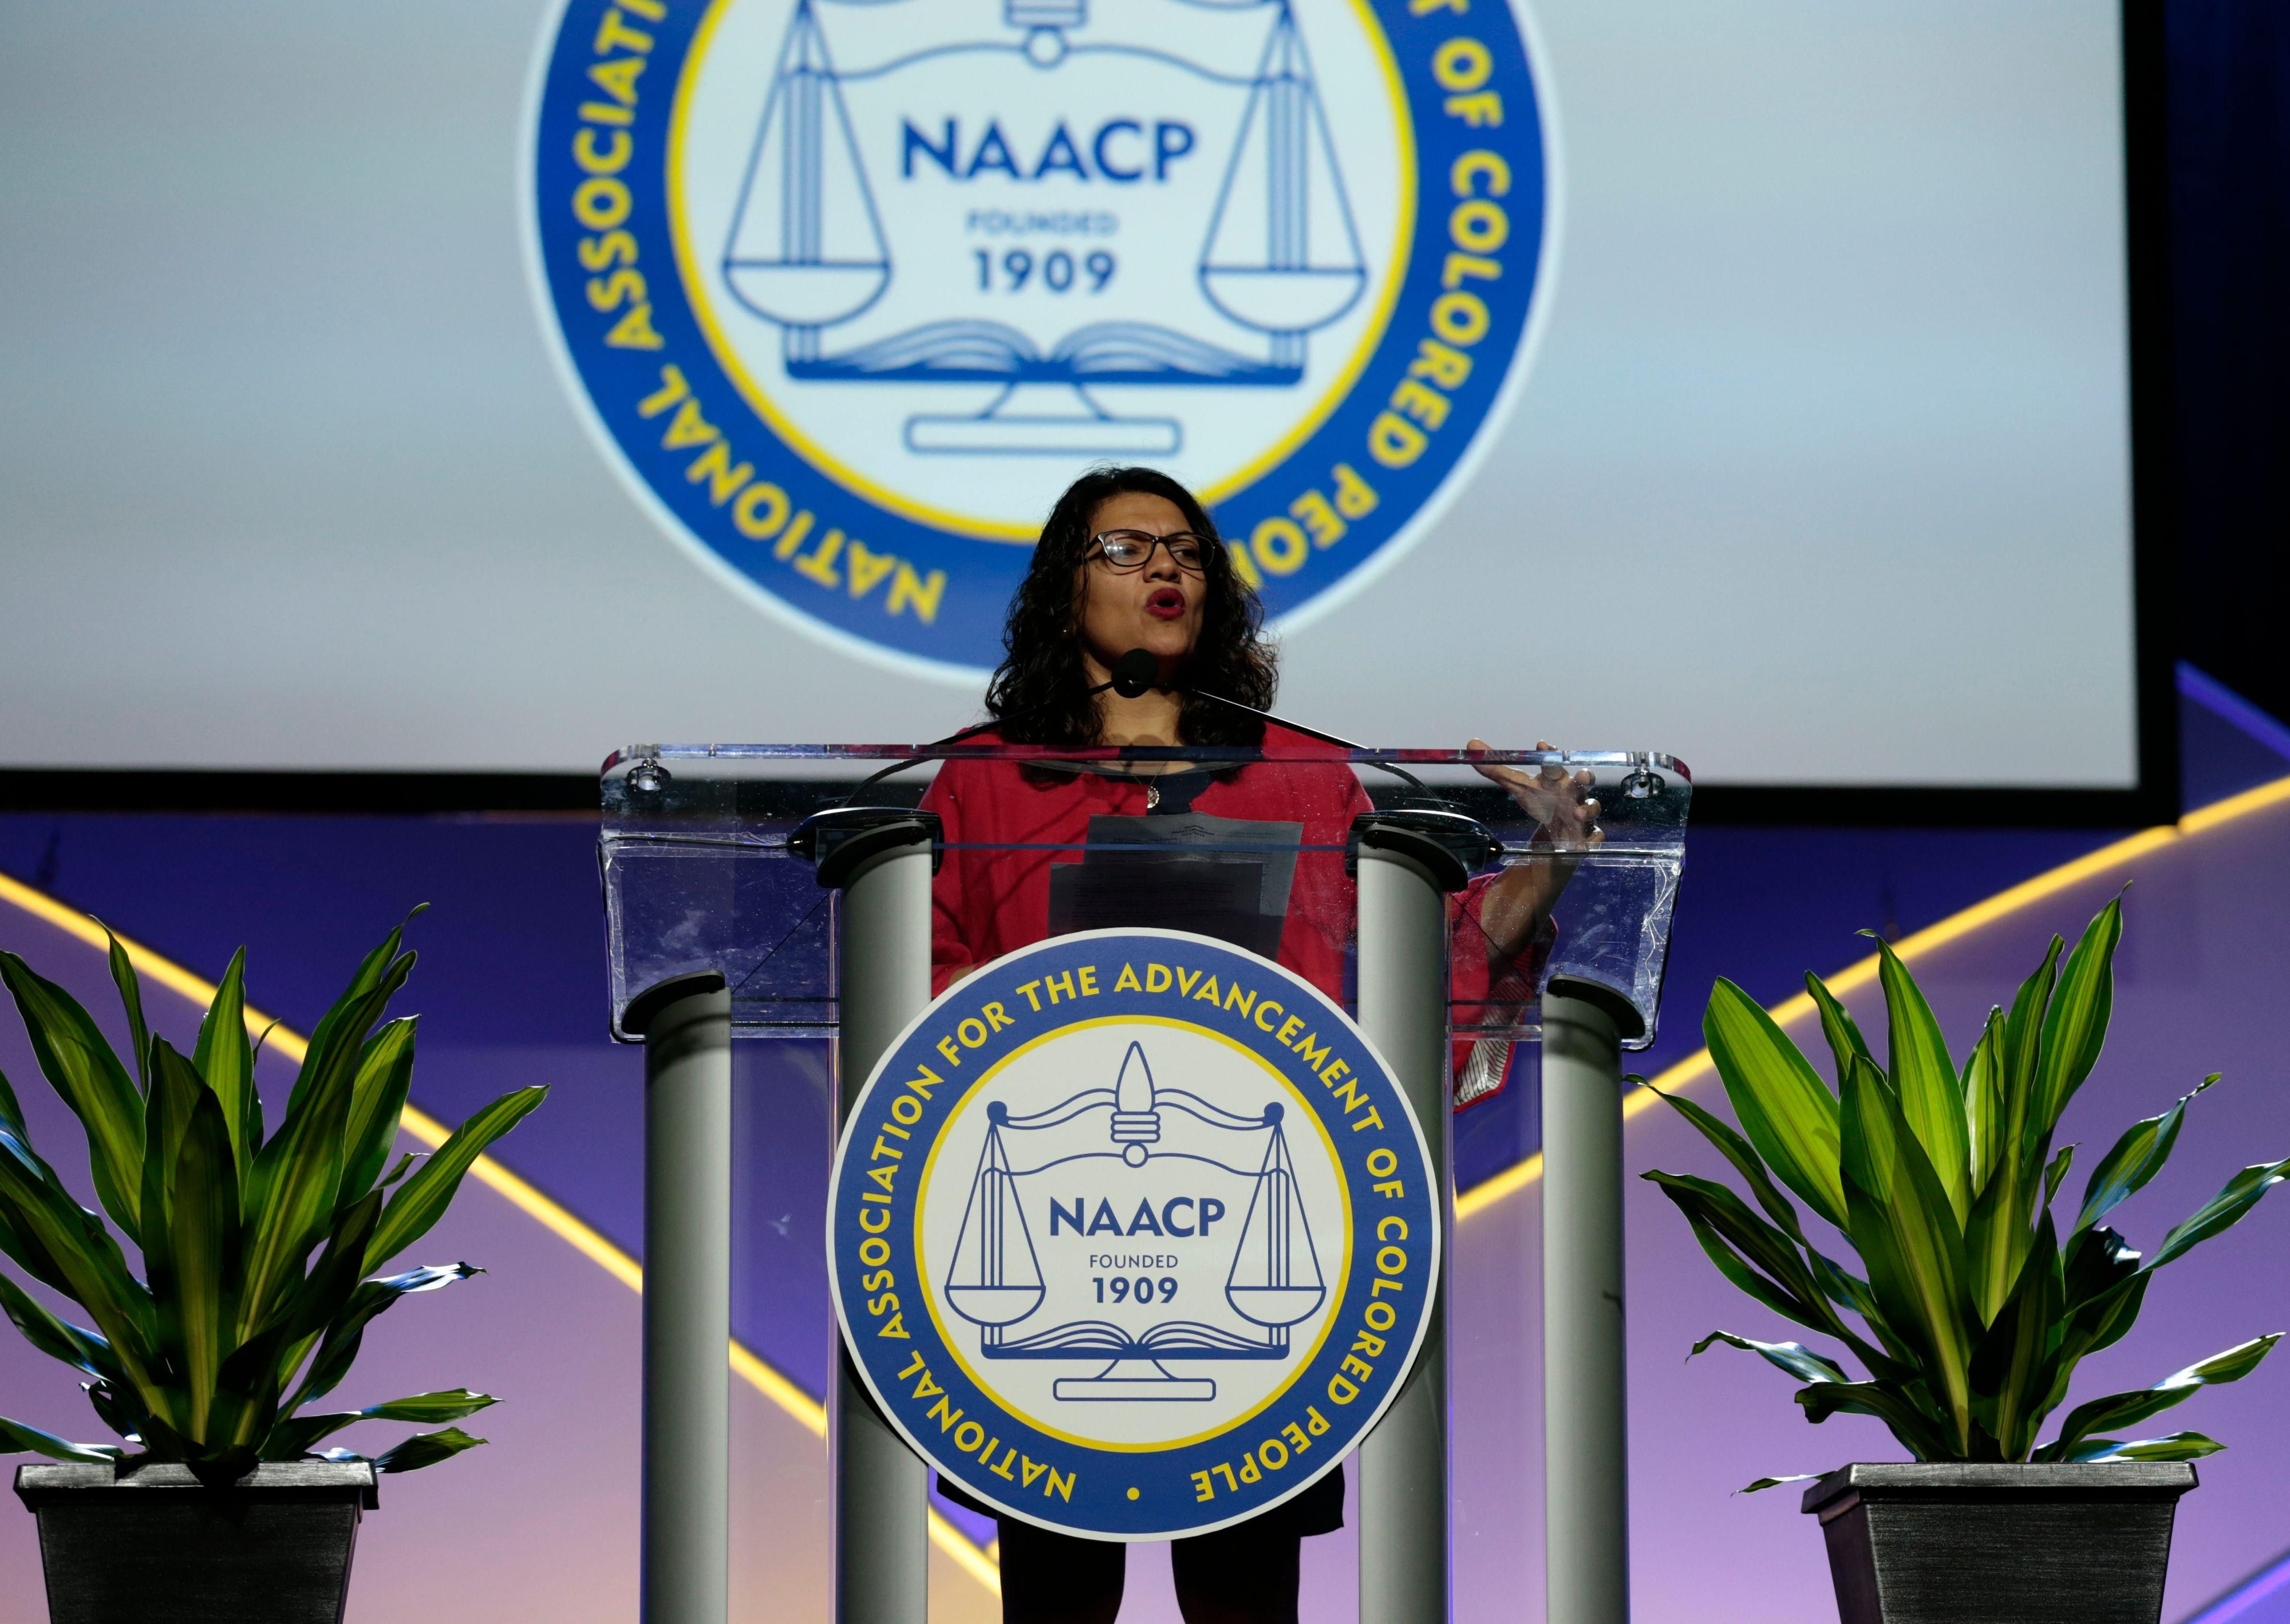 Rep. Rashida Tlaib (D—Michigan) addresses the NAACP's (National Association for the Advancement of Colored People) 110th National Convention at Cobo Center in Detroit, Michigan on July 22, 2019. (Photo: Jeff Kowalsky/AFP/Getty Images)